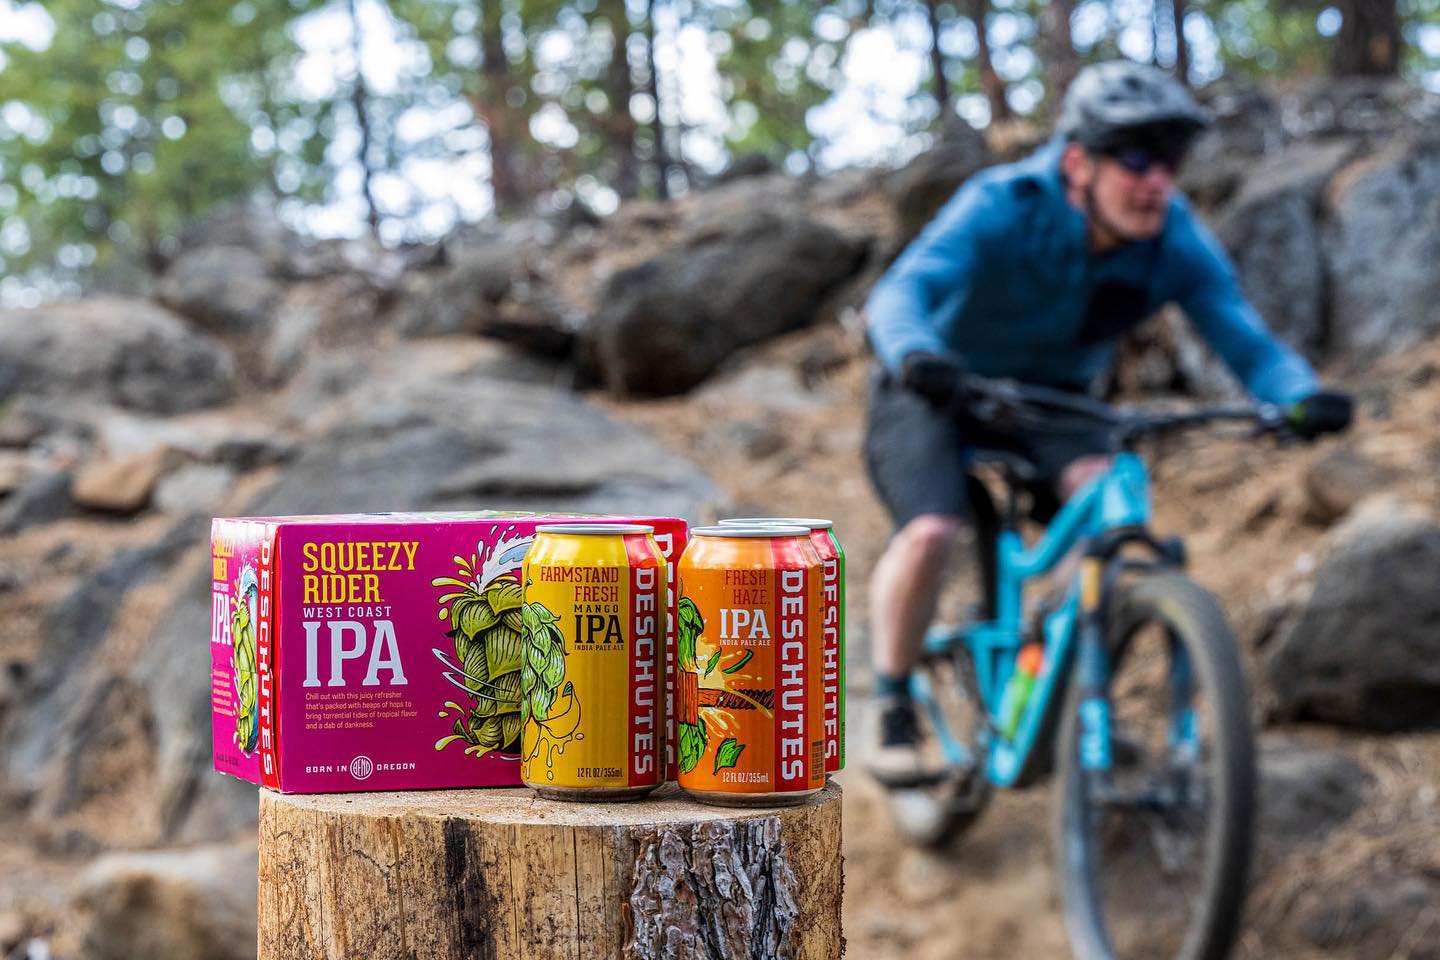 Deschutes Brewery partners with BendTrails as The Official Beer of BendTrails. (photo courtesy of Ben McLeod)